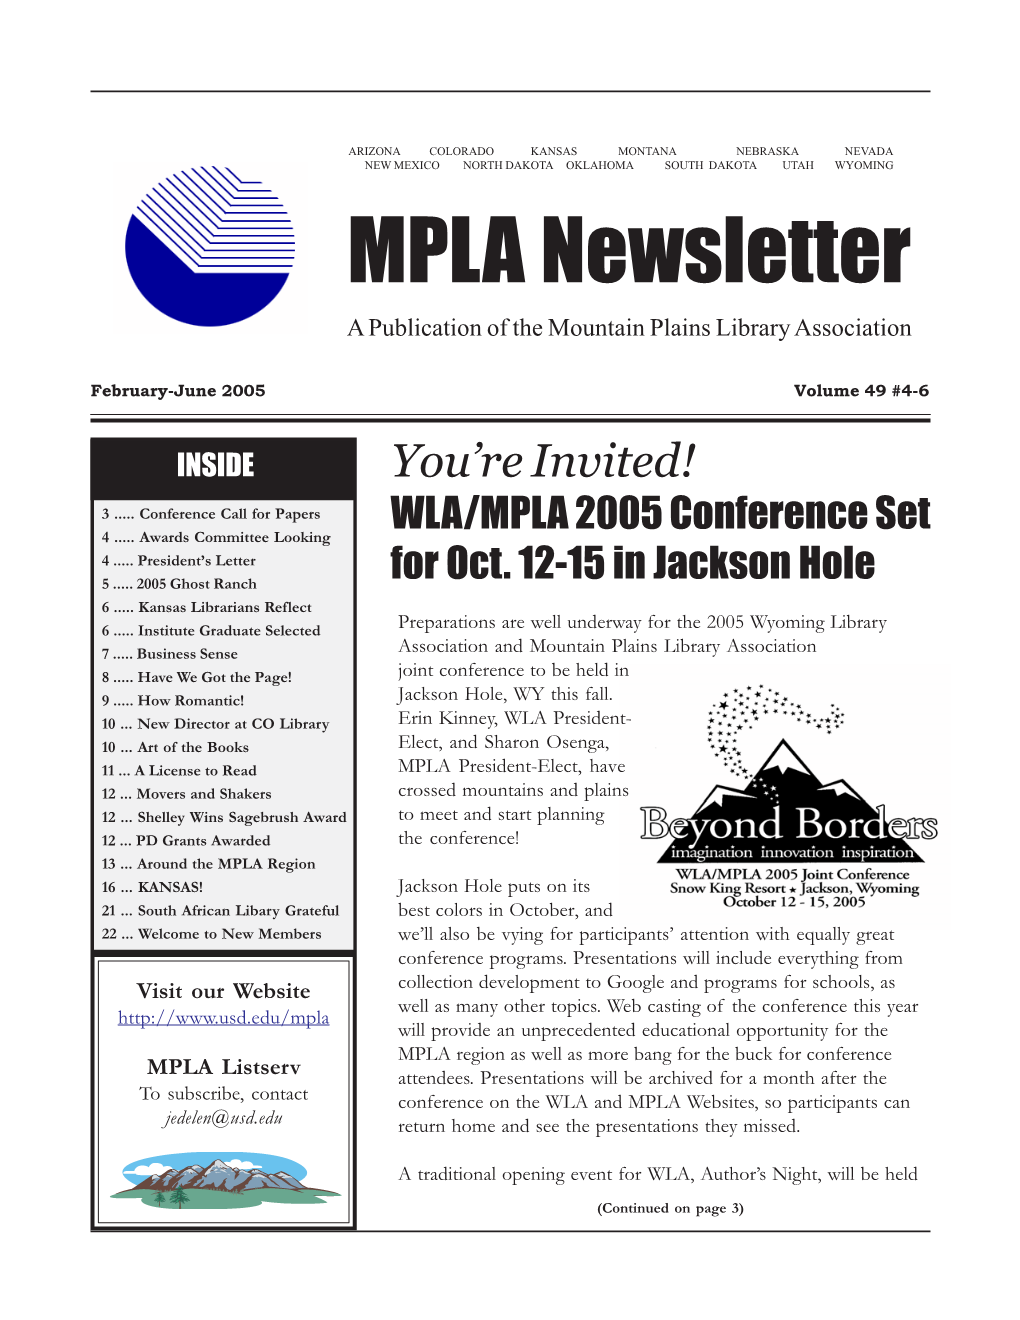 MPLA Newsletter a Publication of the Mountain Plains Library Association